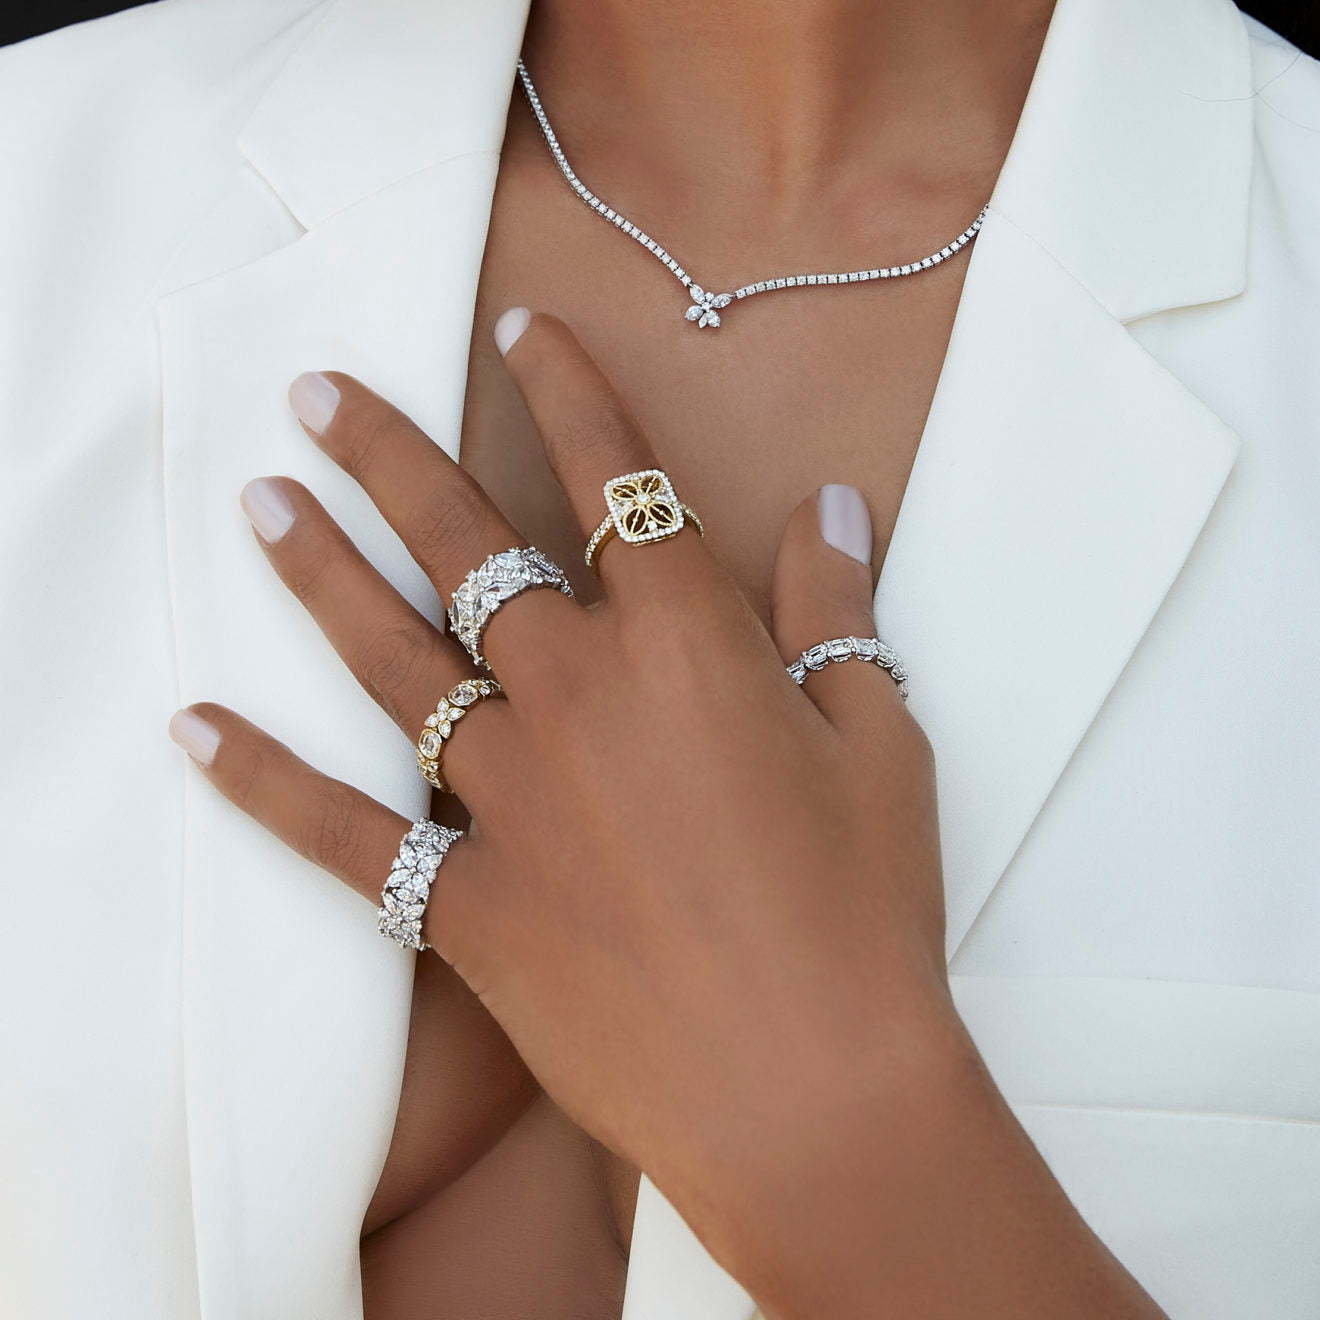 5 Investment Jewelry Pieces That Are Future Heirlooms